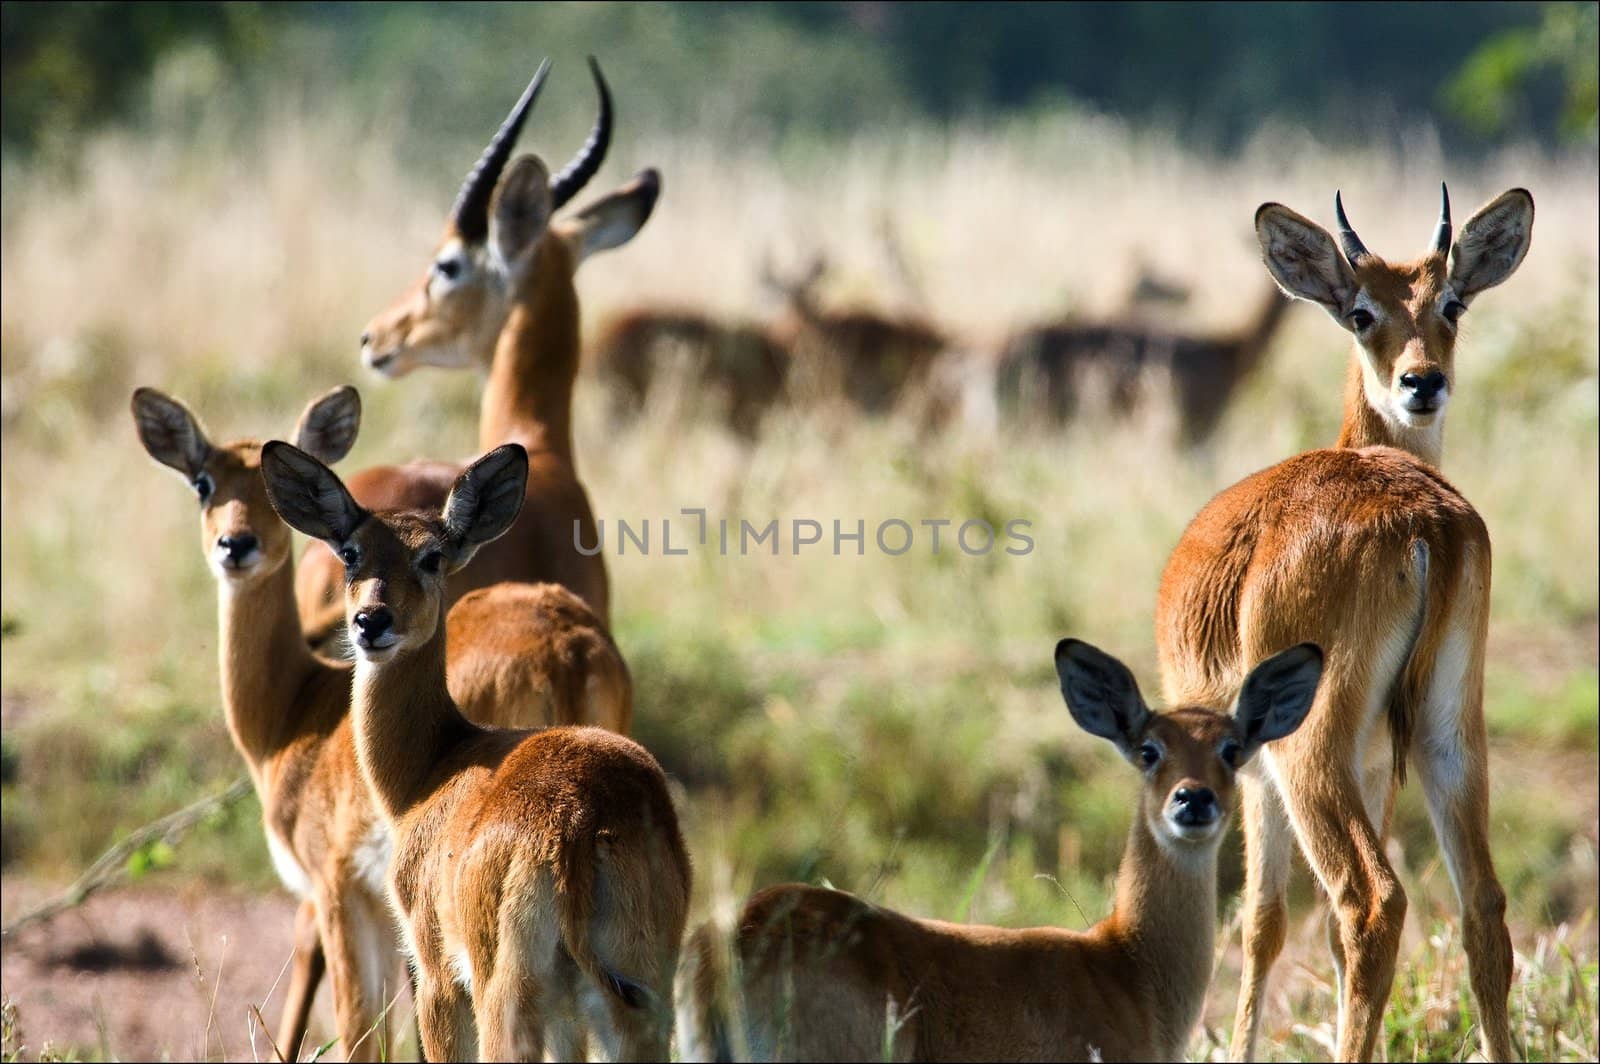 The group of antelopes the impala costs on the grass which has turned yellow from the hot sun.